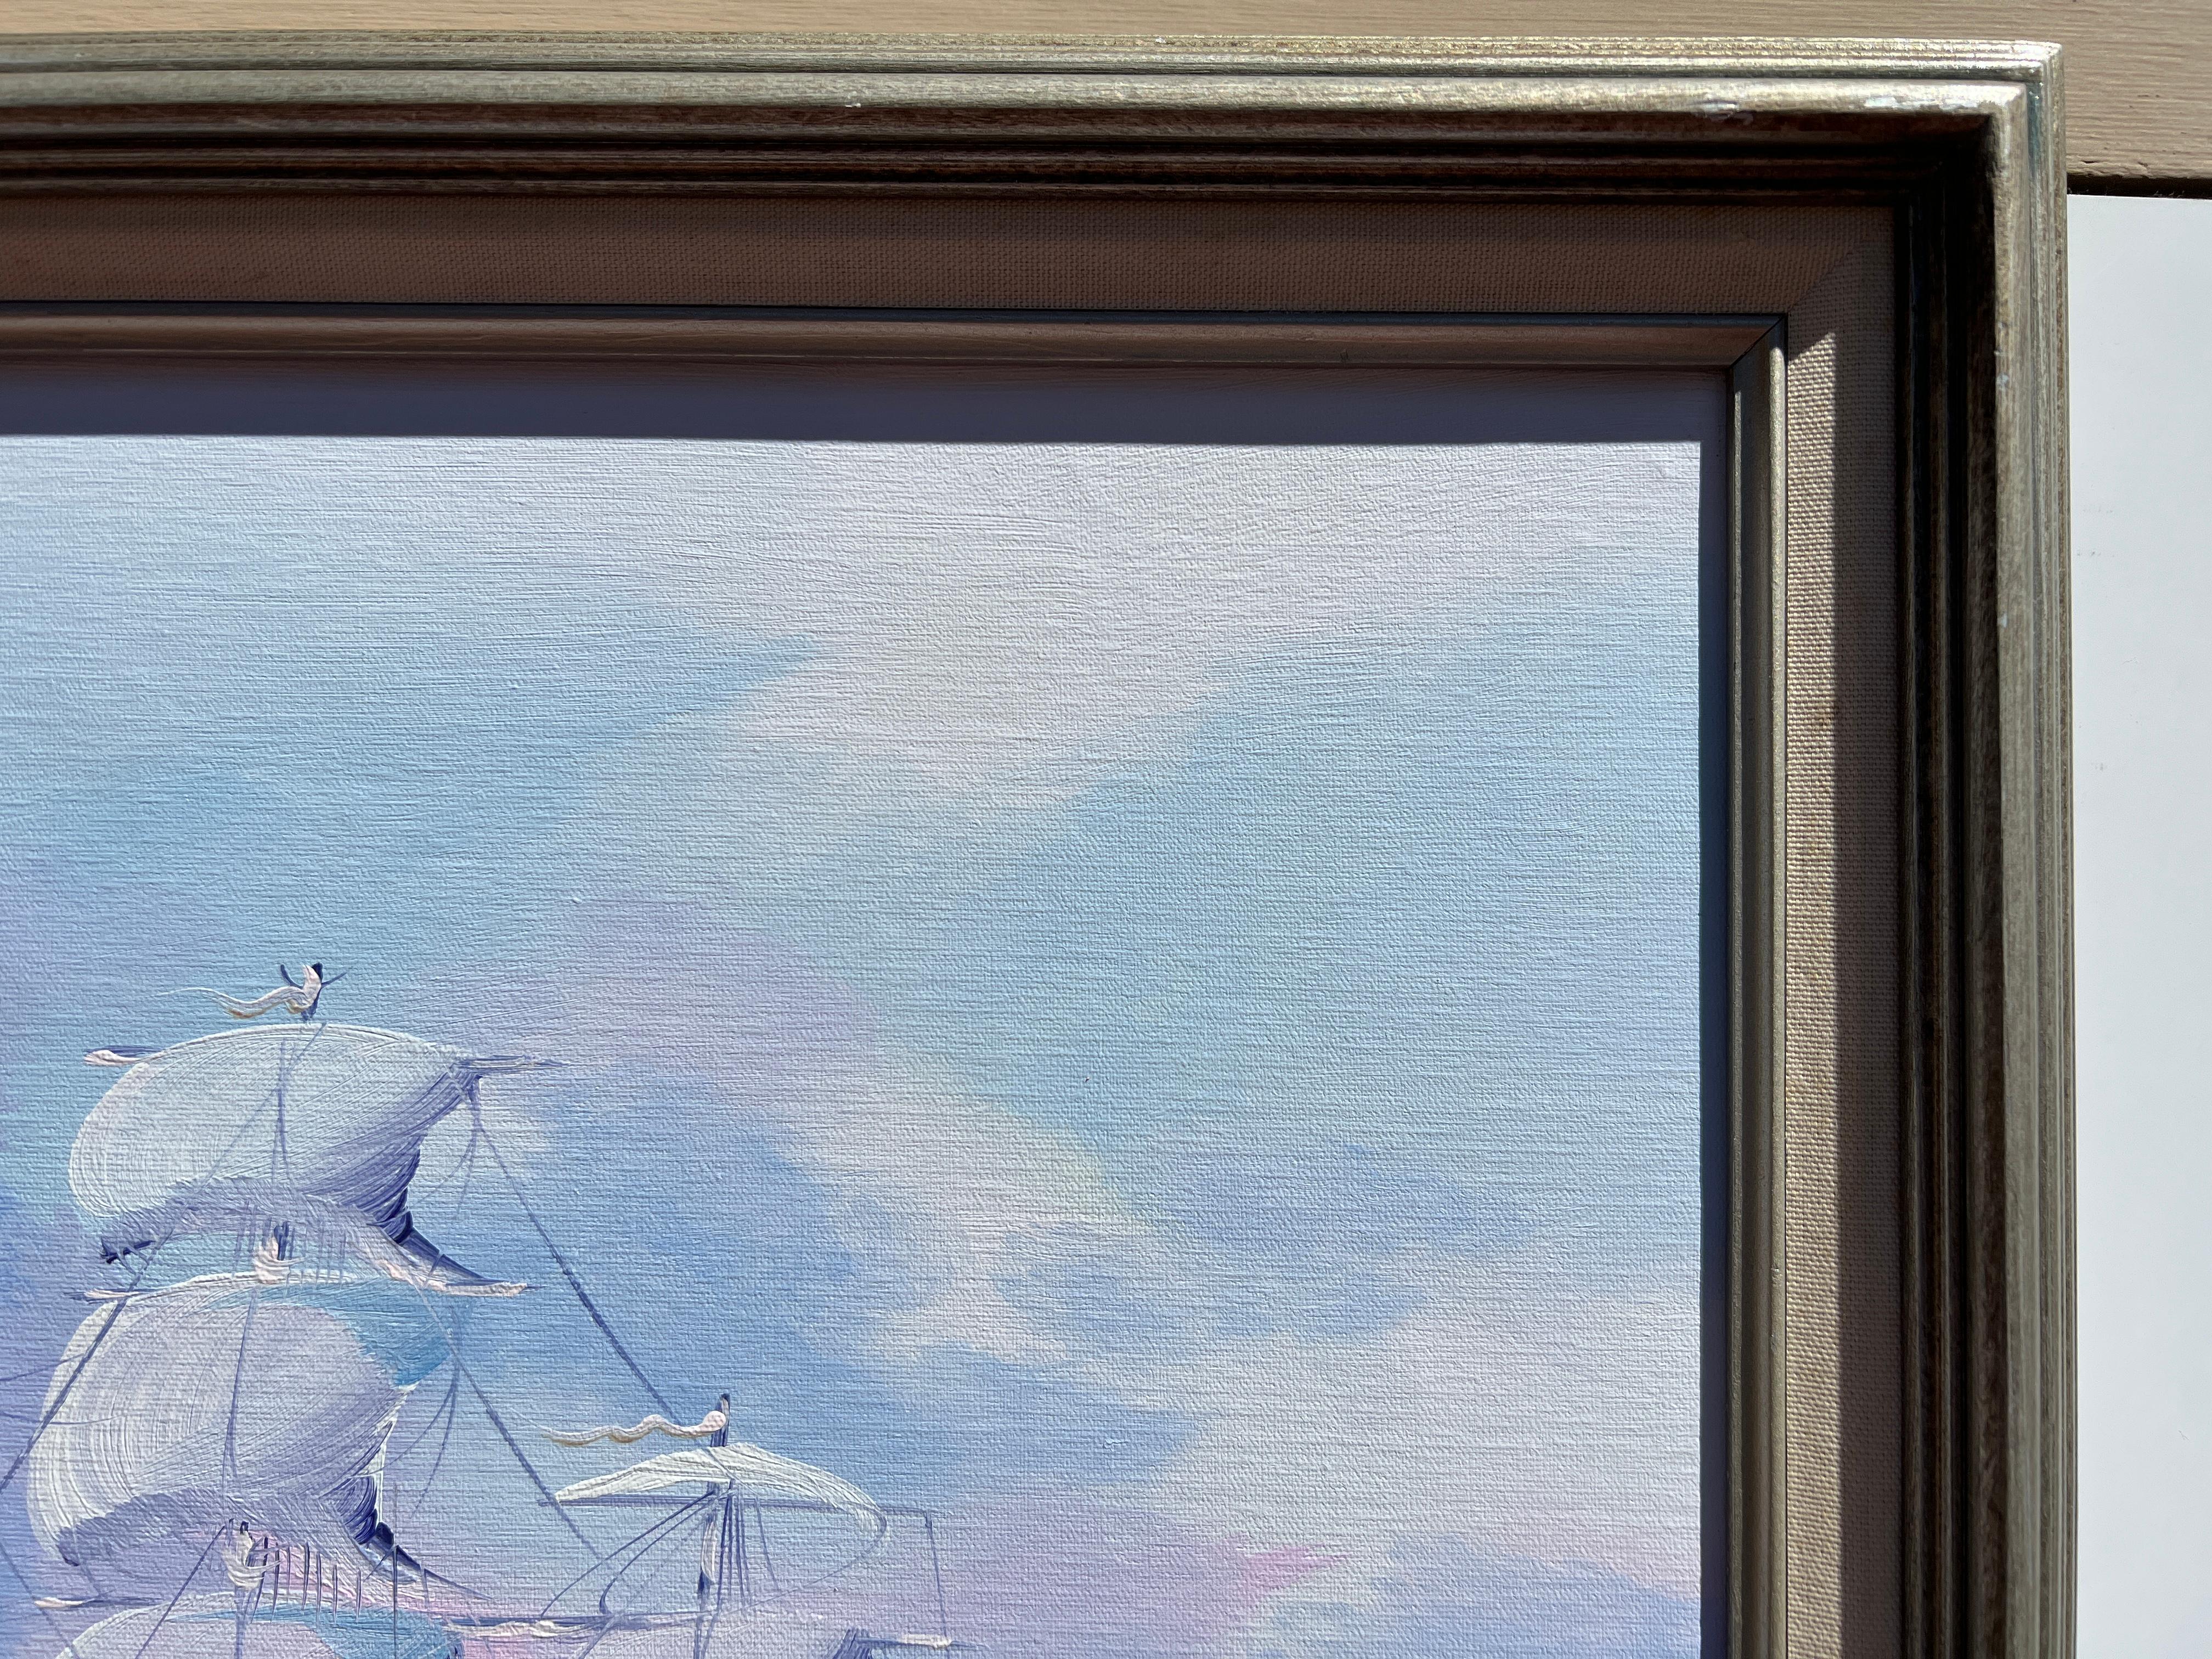  Up for sale is a large original oil painting on canvas depicting a sailing ship breaking through the waves leaving a white trace behind.

Signed in the lower-right corner K. Maskell.

Presented in a nice wood frame. The frame has some scratches and